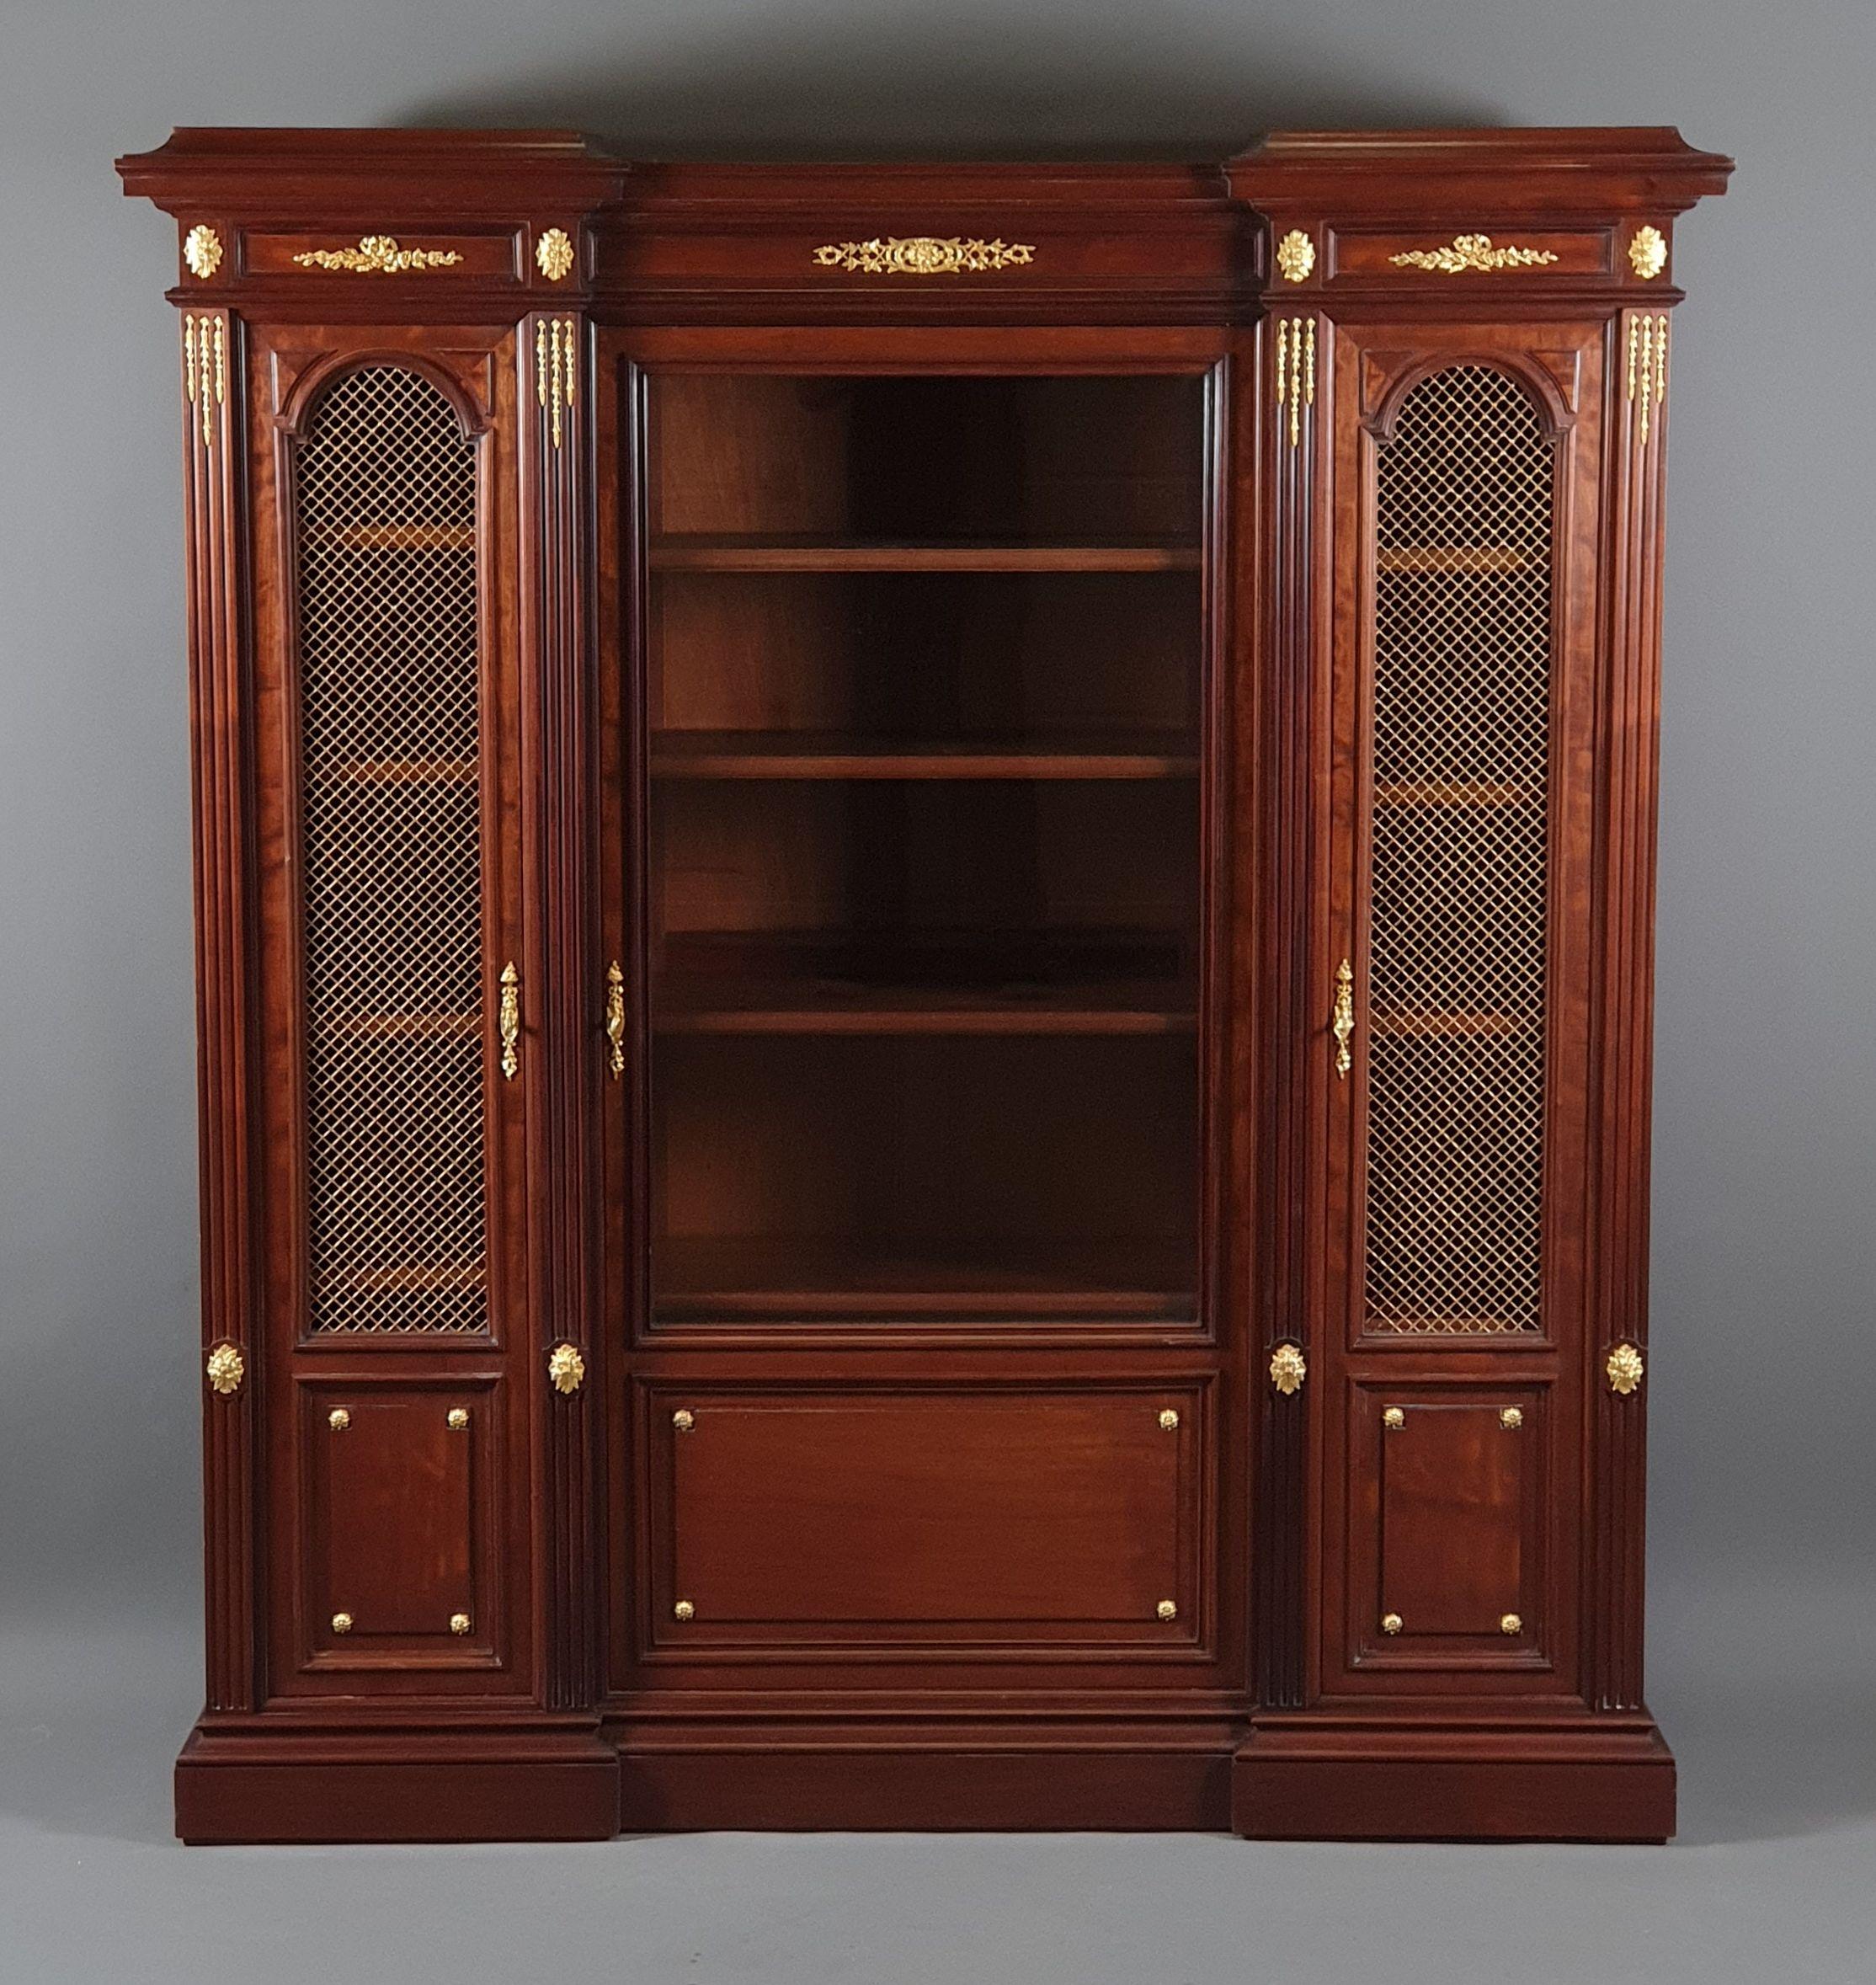 Very elegant Louis XVI style office furniture in solid mahogany and mahogany veneer including :
A middle bureau plat with four fluted legs adorned with very finely chiseled gilt bronze asparagus, fawn leather top with gilt friezes, two retractable